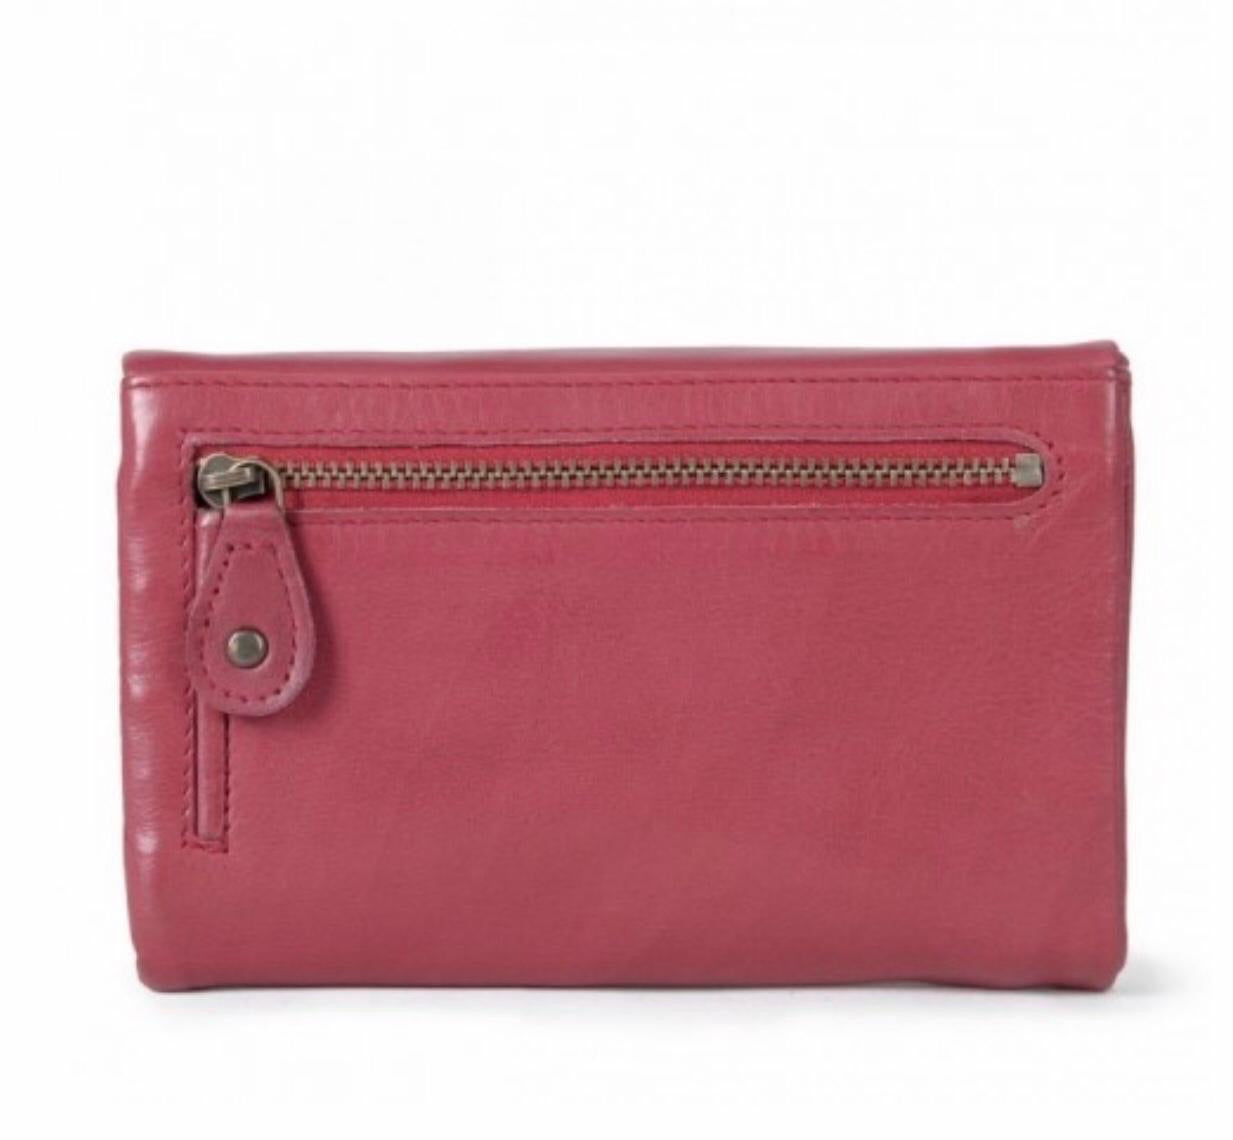 Aunts & Uncles - peach jazzy red wallet